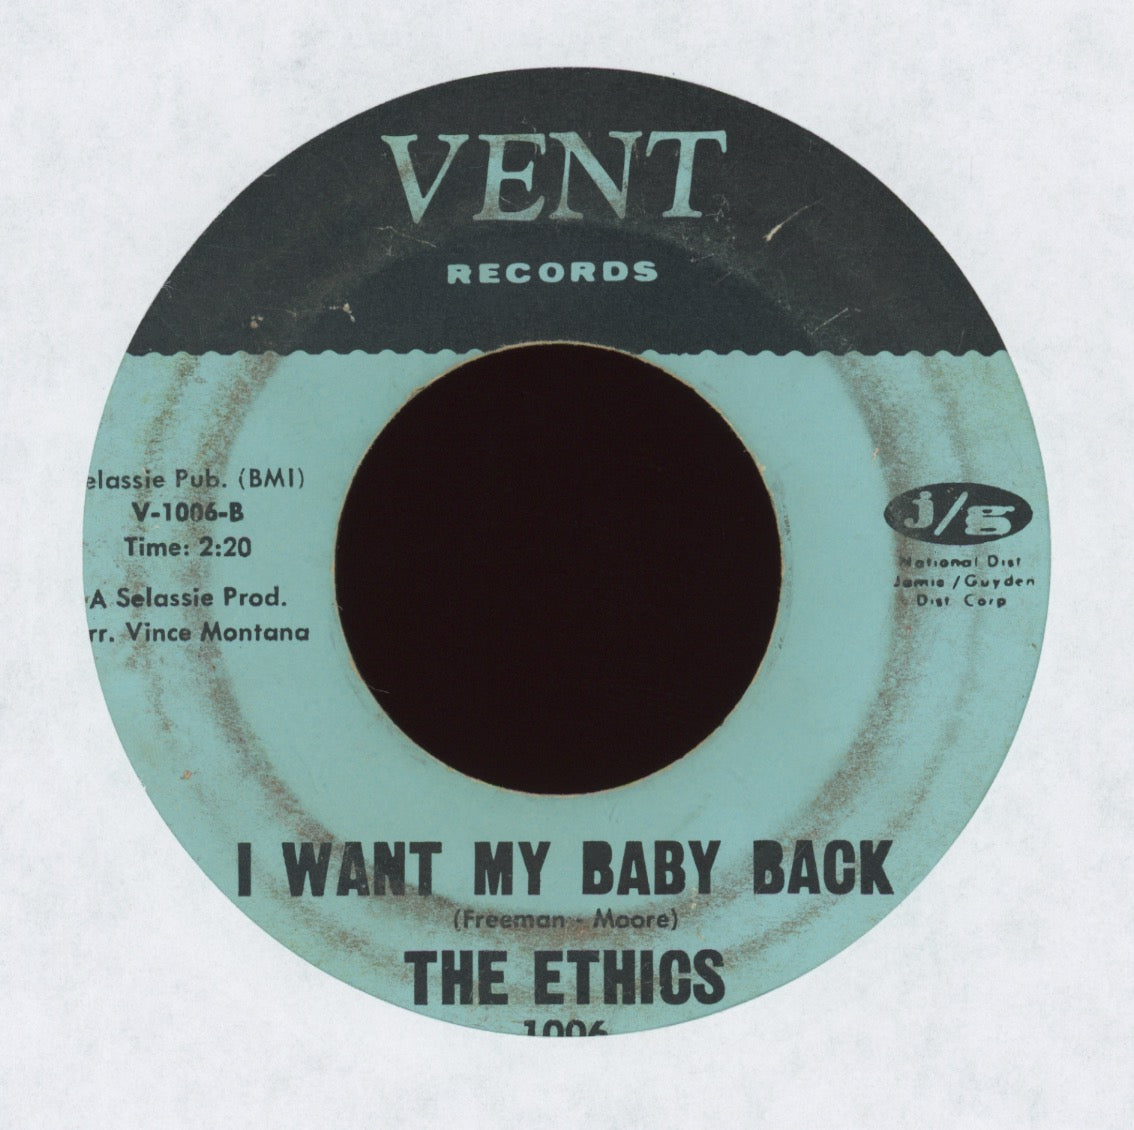 The Ethics - Farewell  / I Want My Baby Back on Vent